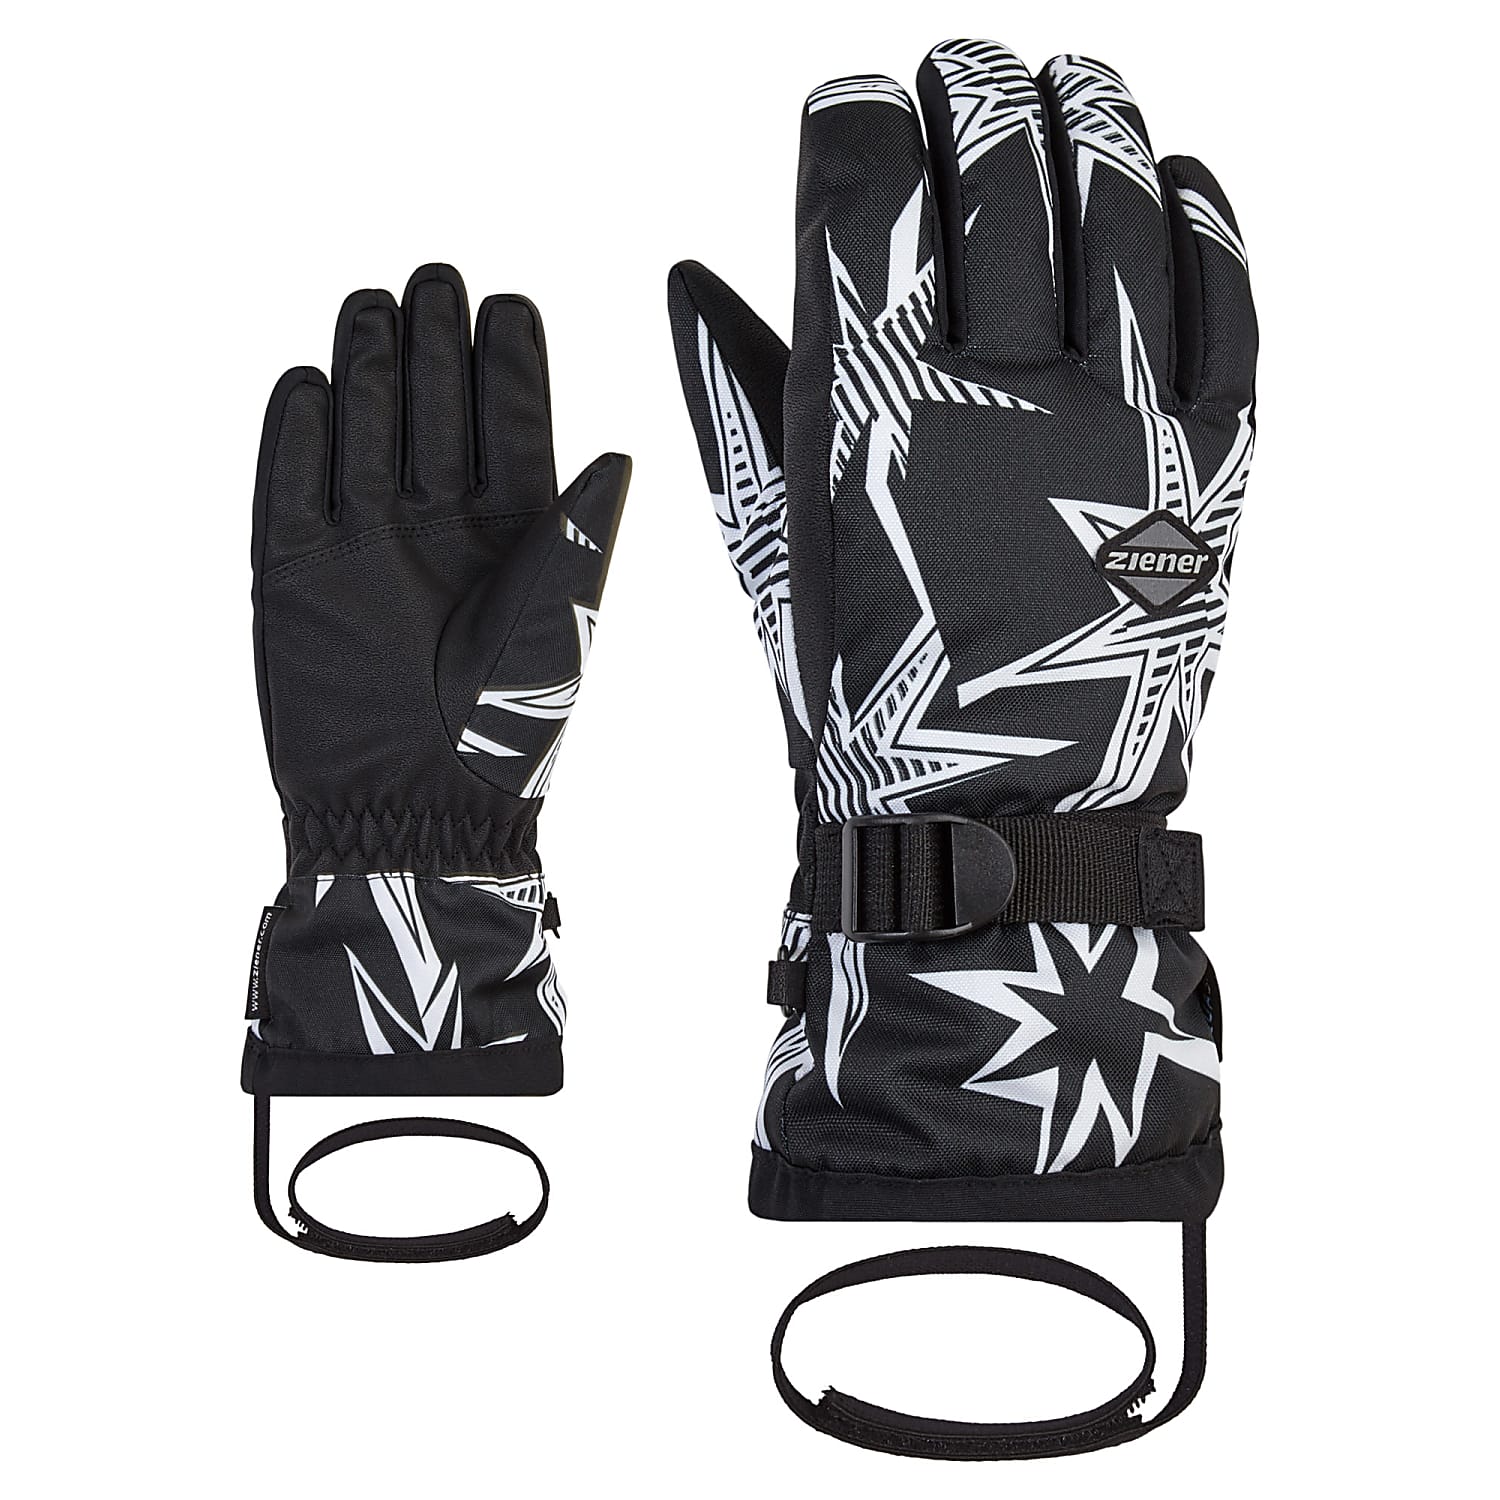 Ziener JUNIOR LASSIM and Black shipping - GLOVE, Fast AS cheap